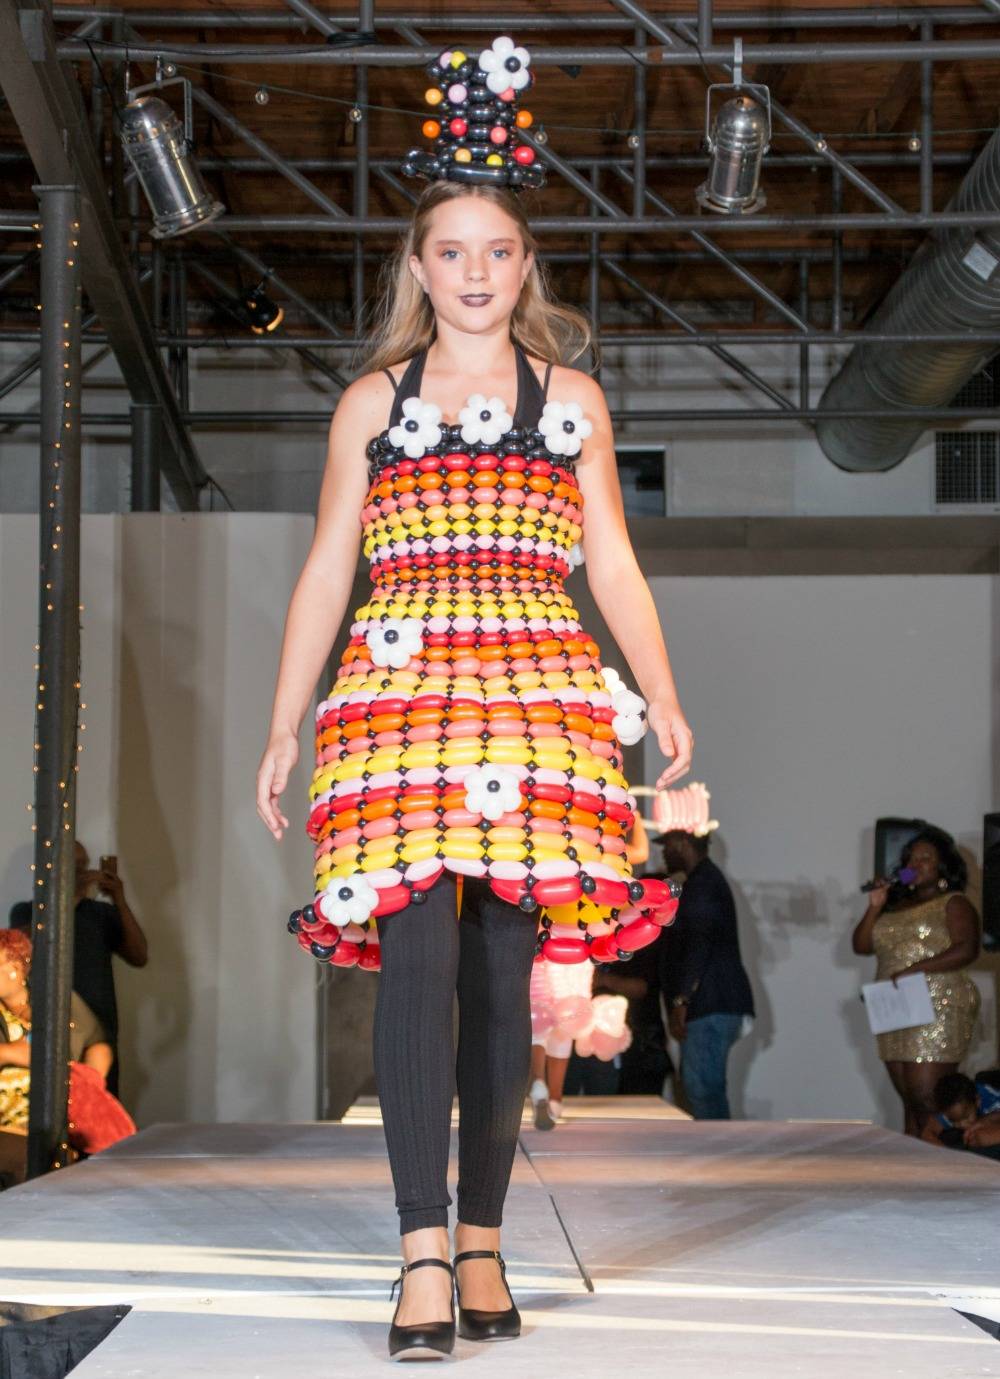 DFW Teen Fashion Week ~ This dress was made by my assistant, Trica. I think she did an amazing job!